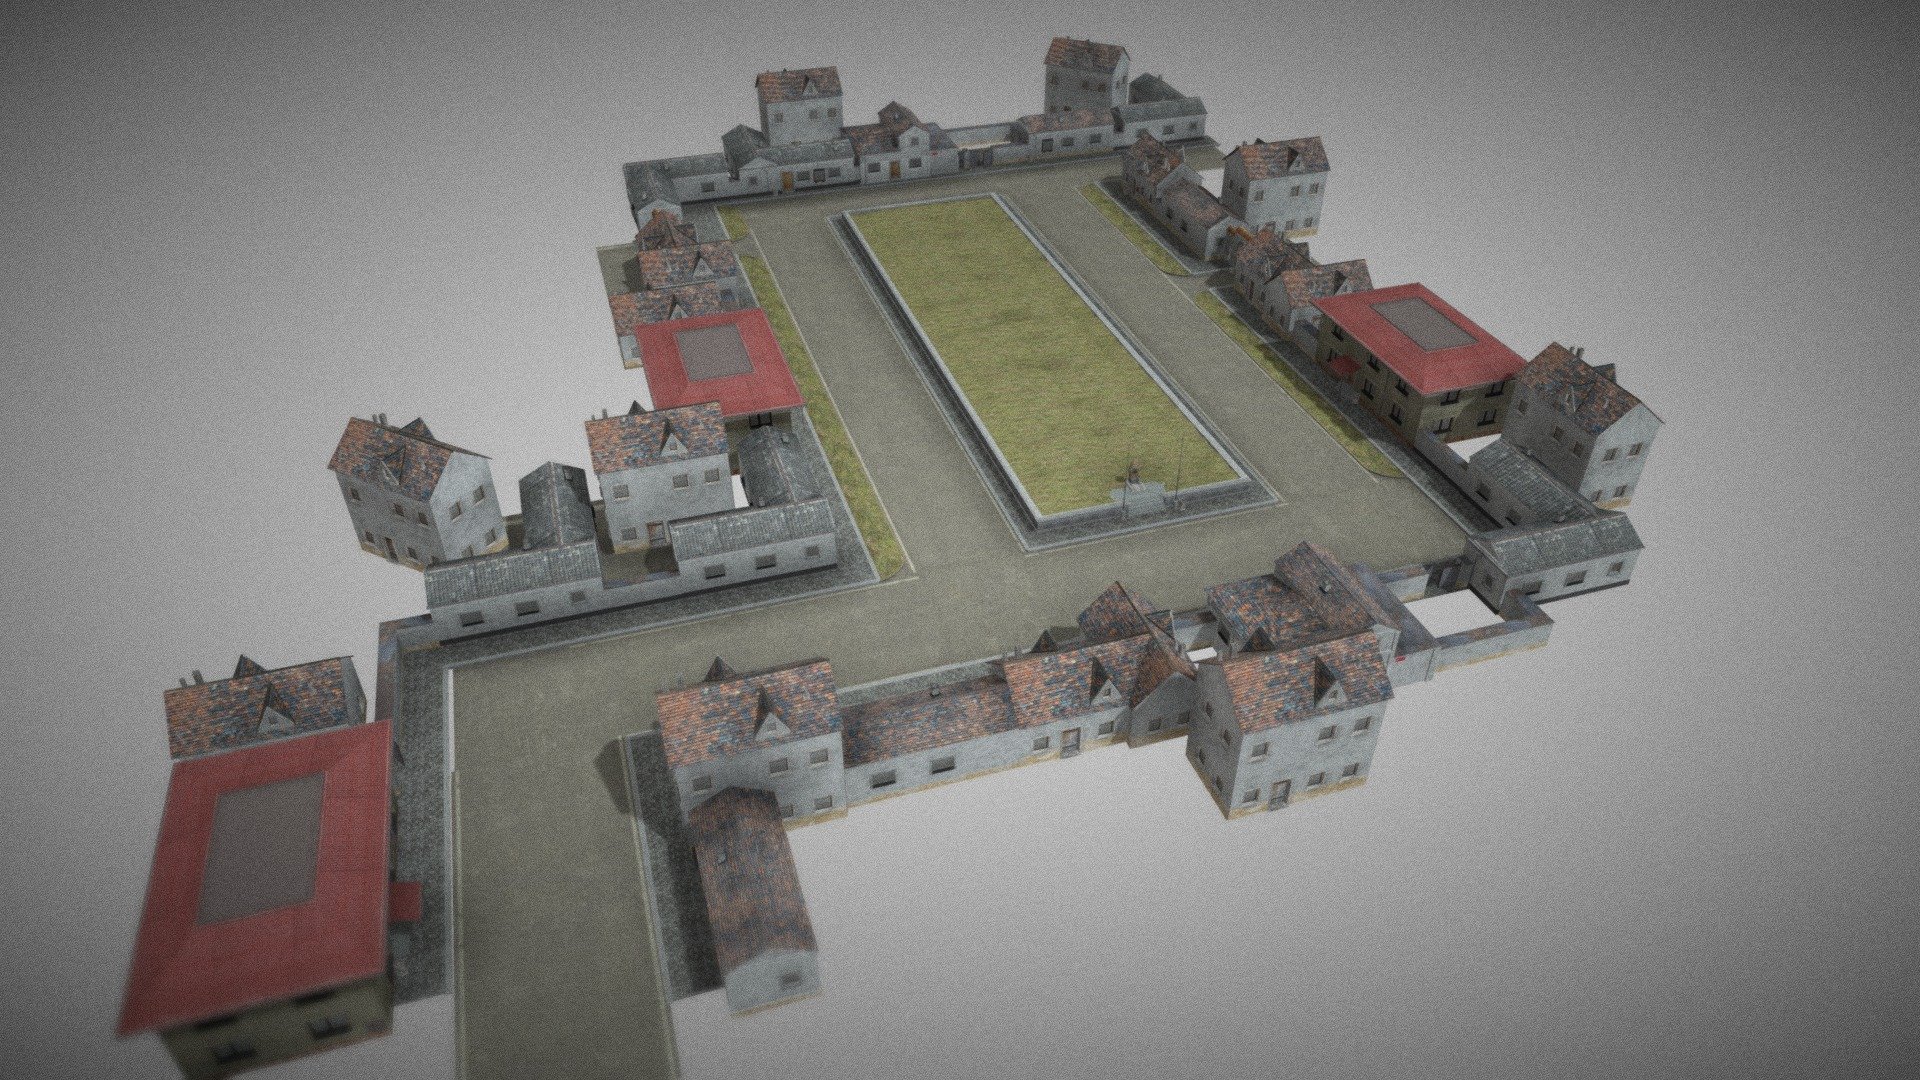 Historic reconstruction of village during socialism in Czechoslovakia.

This model was part of a 360° VR experience about life in a Czechoslovak Socialist Republic made for traveling exhibition 2019 - Socialist village - 3D model by Sebastian.Dohnal 3d model